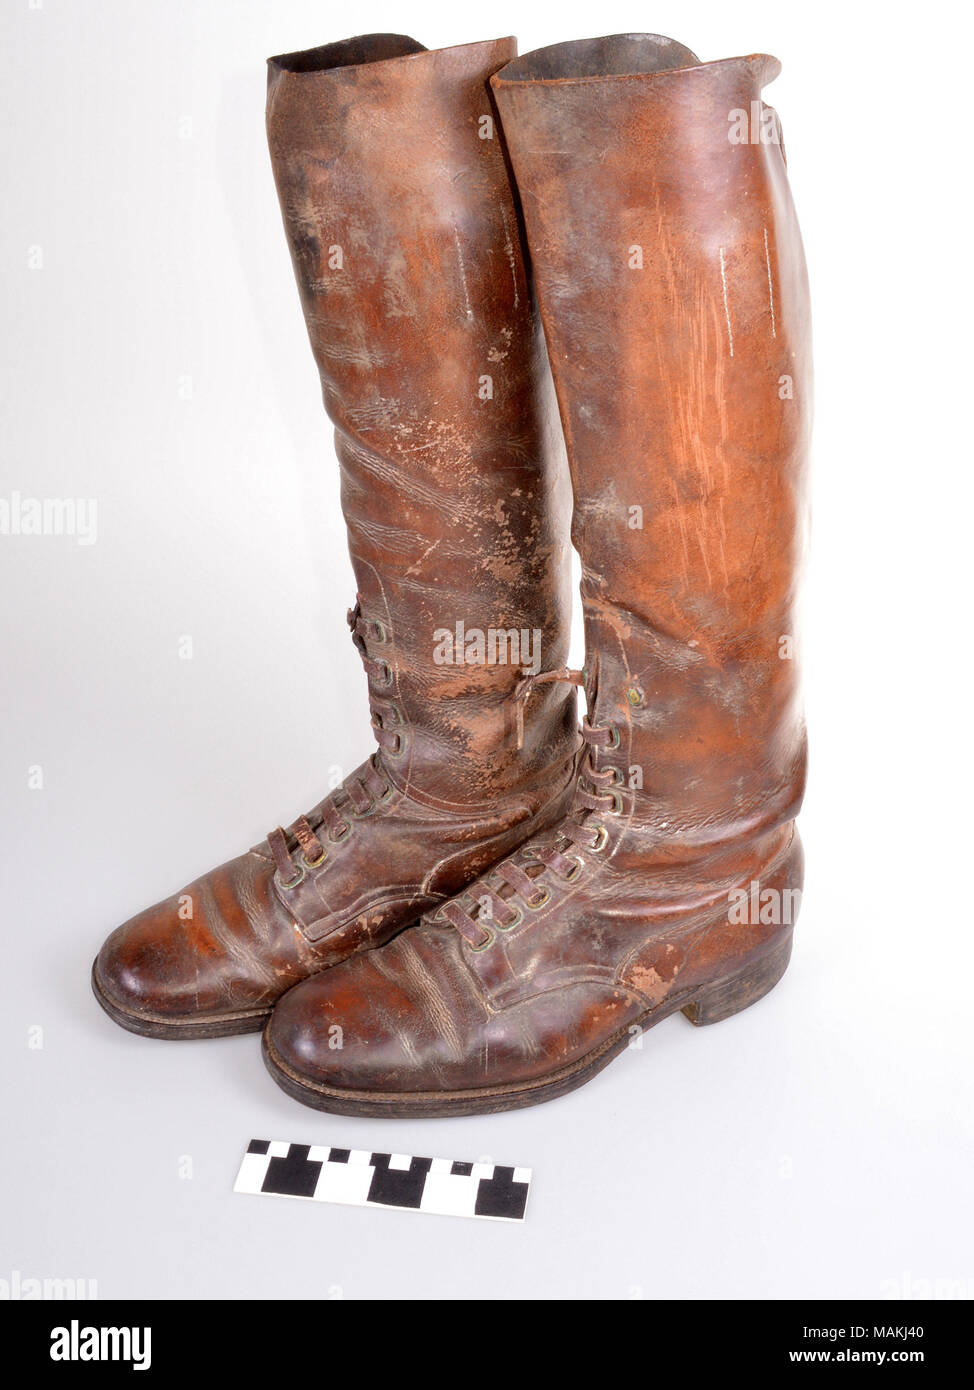 World War I French Uniform leather boots of Joseph Desloge. Desloge volunteered for World War I service in January 1917 and was attached to the French Army as an ambulance driver. He later enlisted in the French Army and served as an artillery liaison officer with the 11th Artillery Regiment. He was decorated for valor for his actions near Voziers. Title: World War I French Uniform Boots of Joseph Desloge  . between 1917 and 1919. Stock Photo